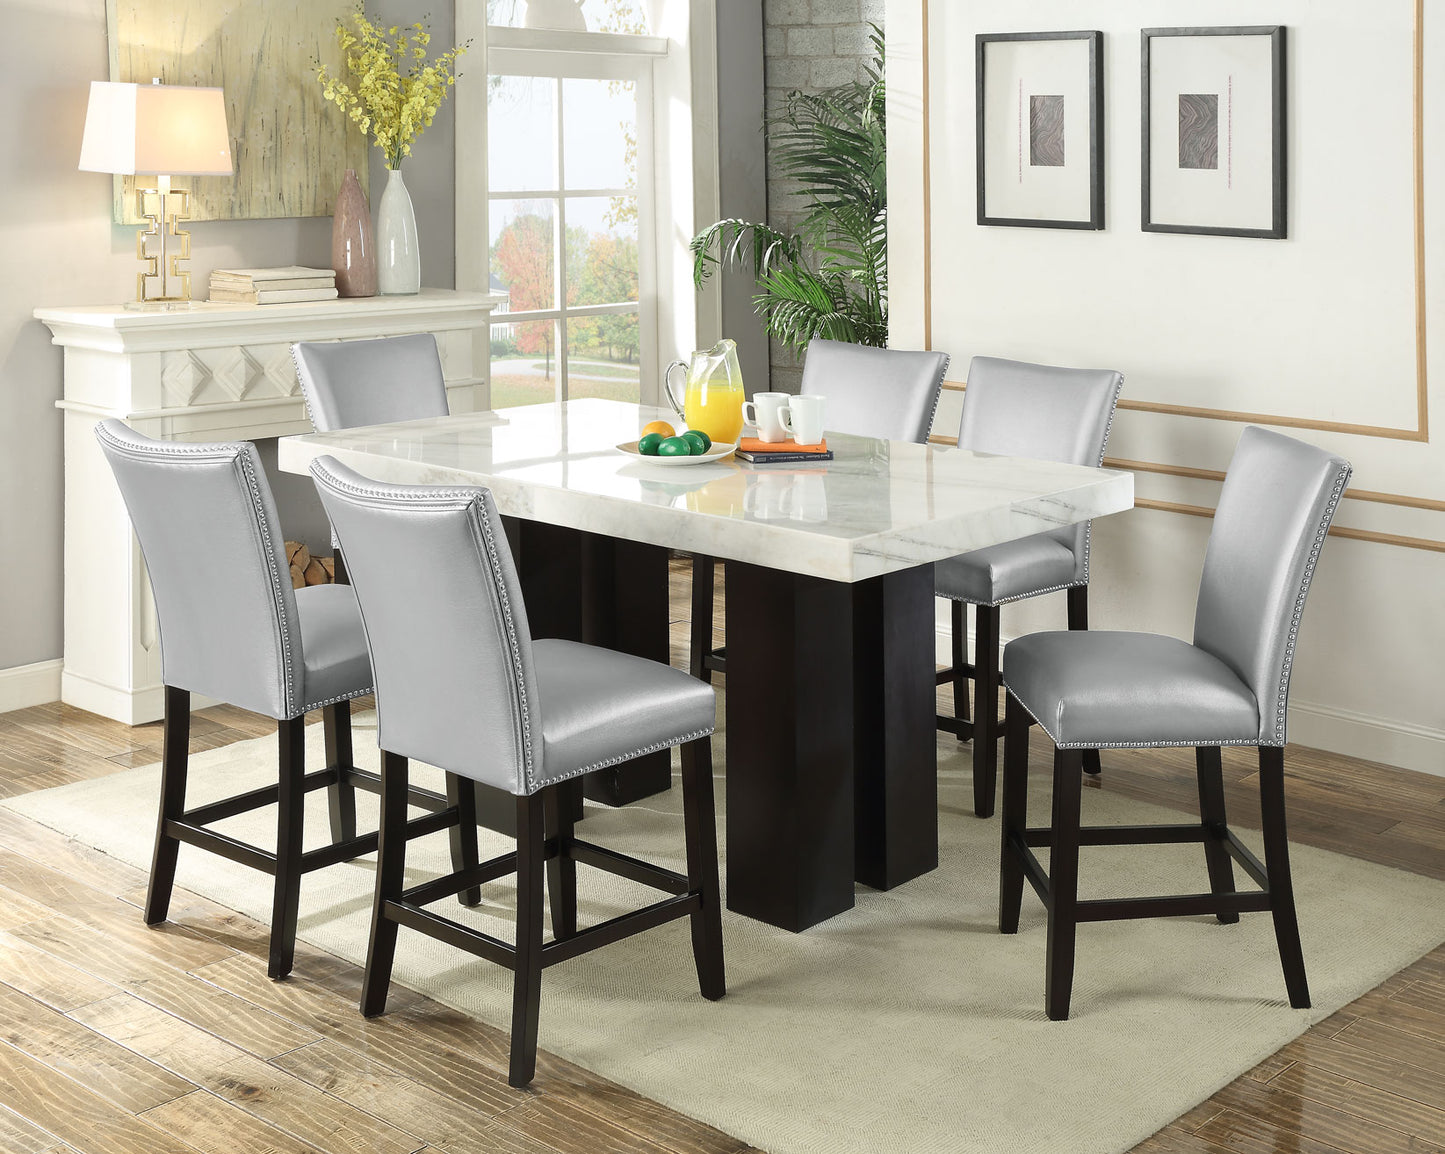 Camila 7 Piece Rectangular White Marble Top Counter Dining Set
(Counter Table & 6 Counter Chairs)